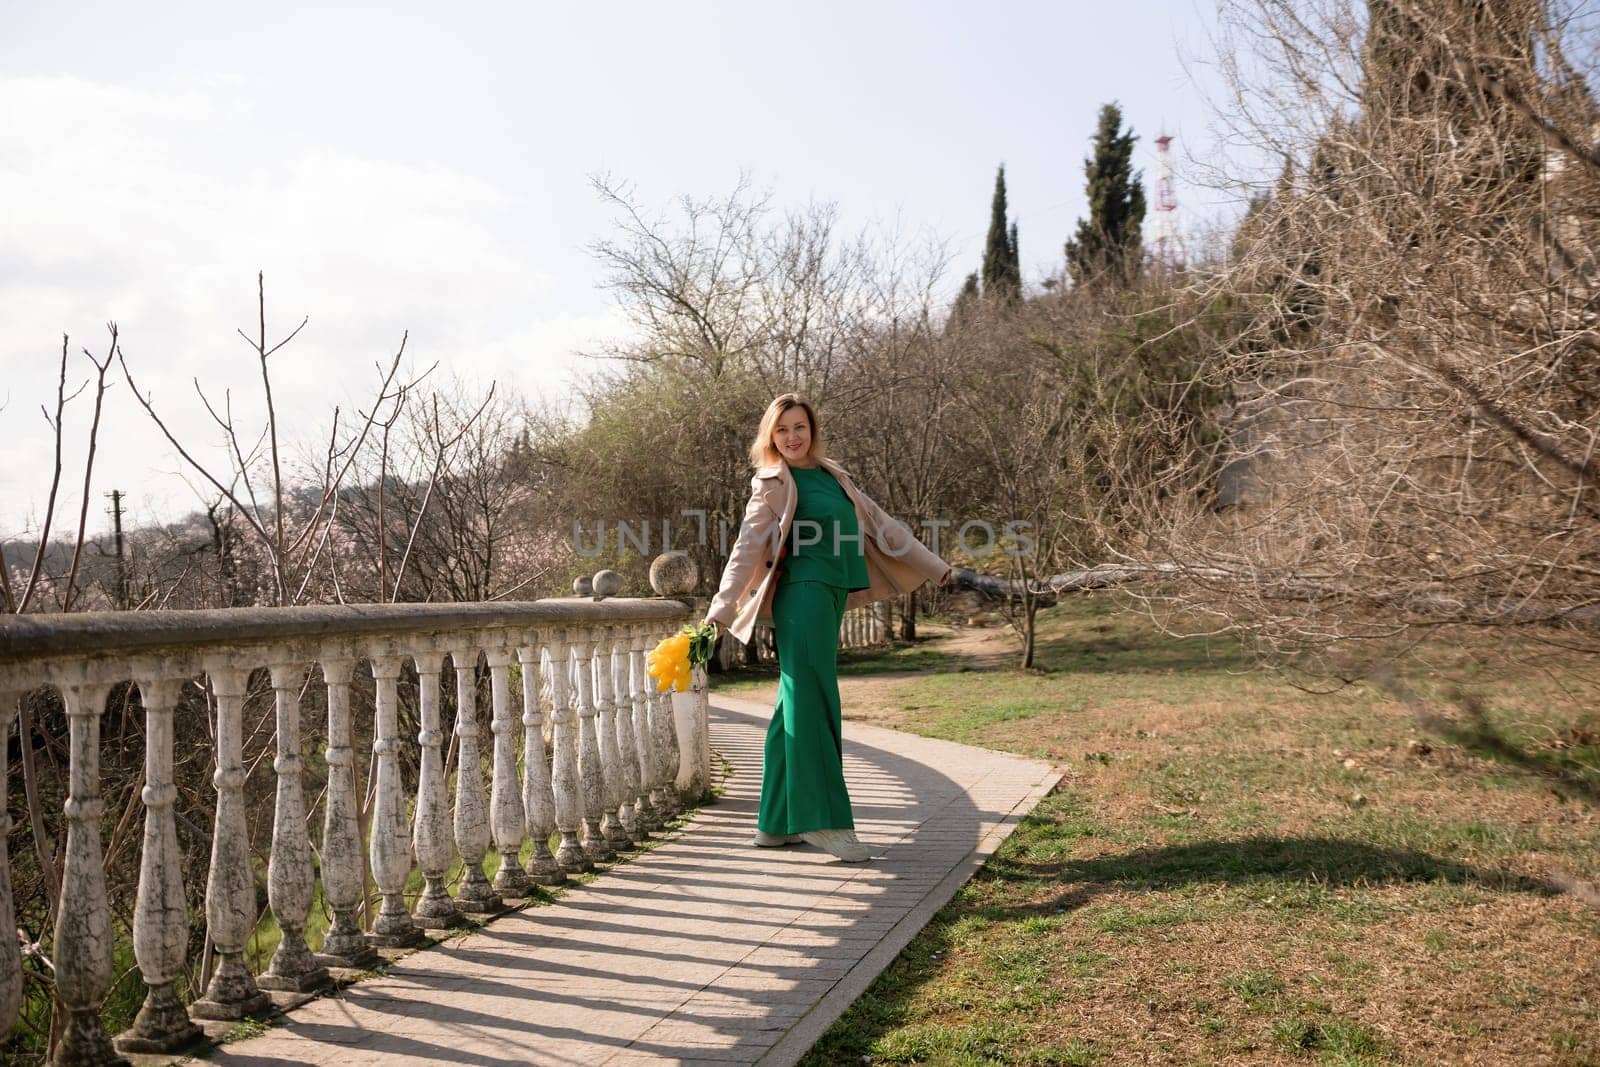 A woman in a green dress stands on a path next to a railing. She is holding a yellow bag and a yellow flower. The scene is peaceful and serene, with the woman posing for a photo. by Matiunina